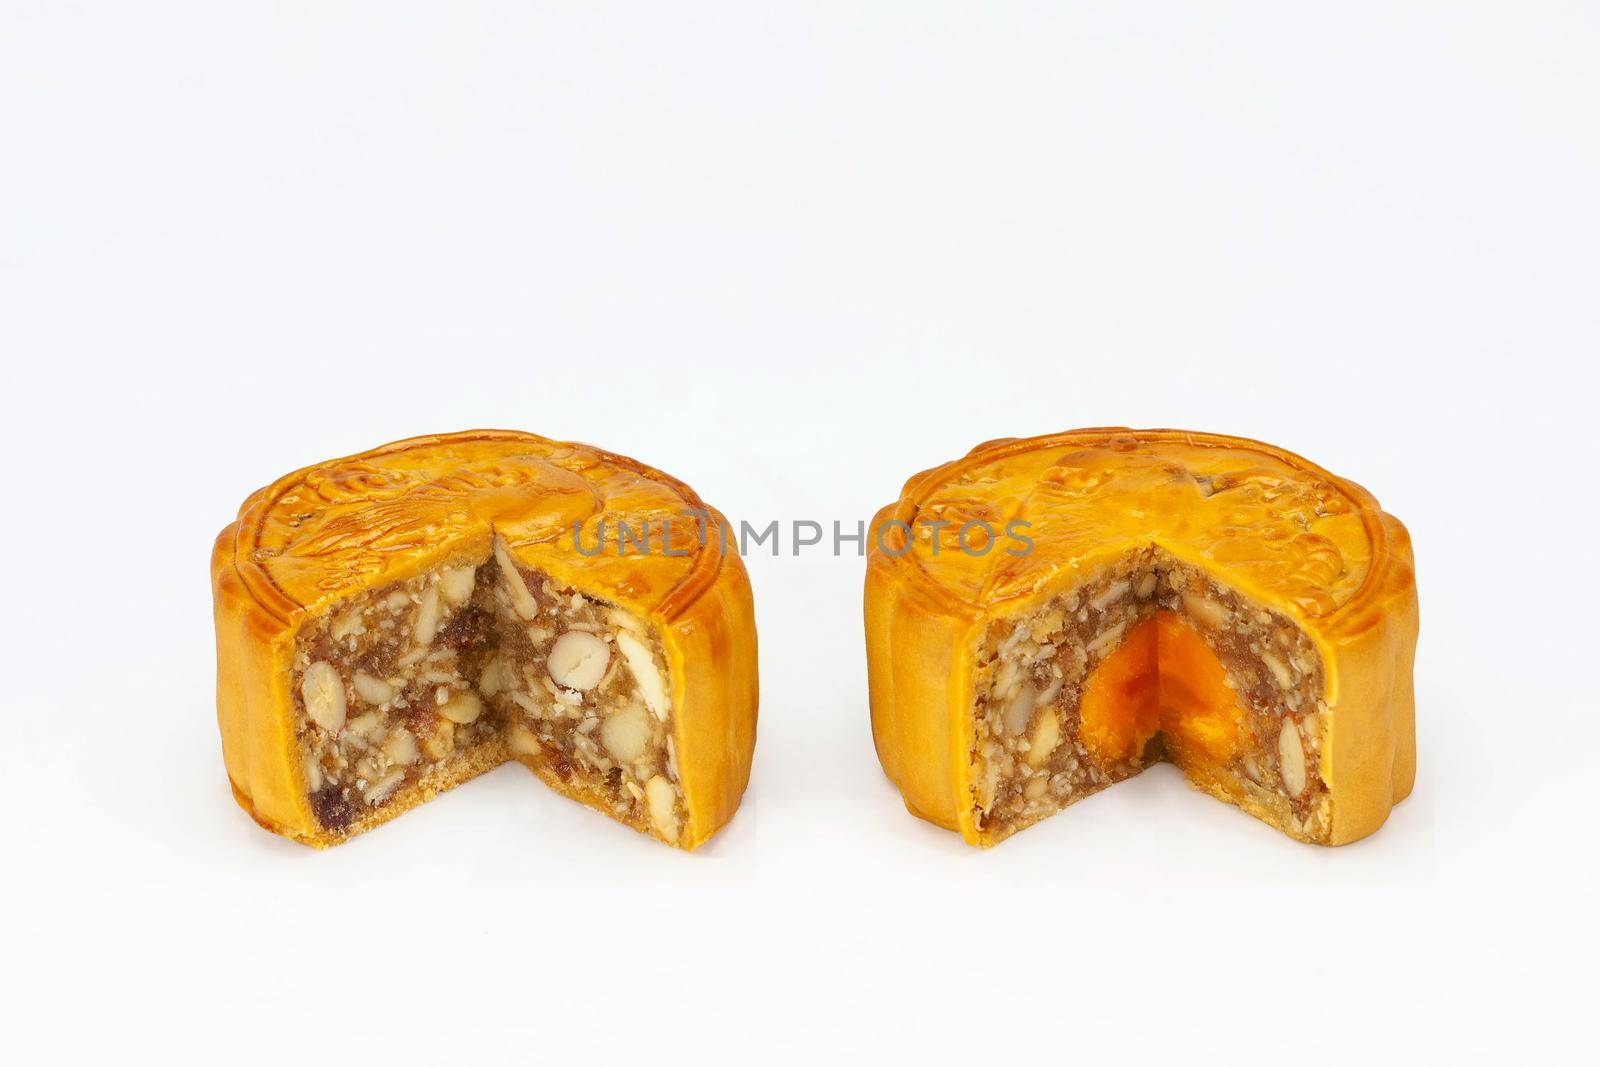 Wuren (Mixed Nuts) and  Salted Egg Yolk filling Mooncake on white background by toa55